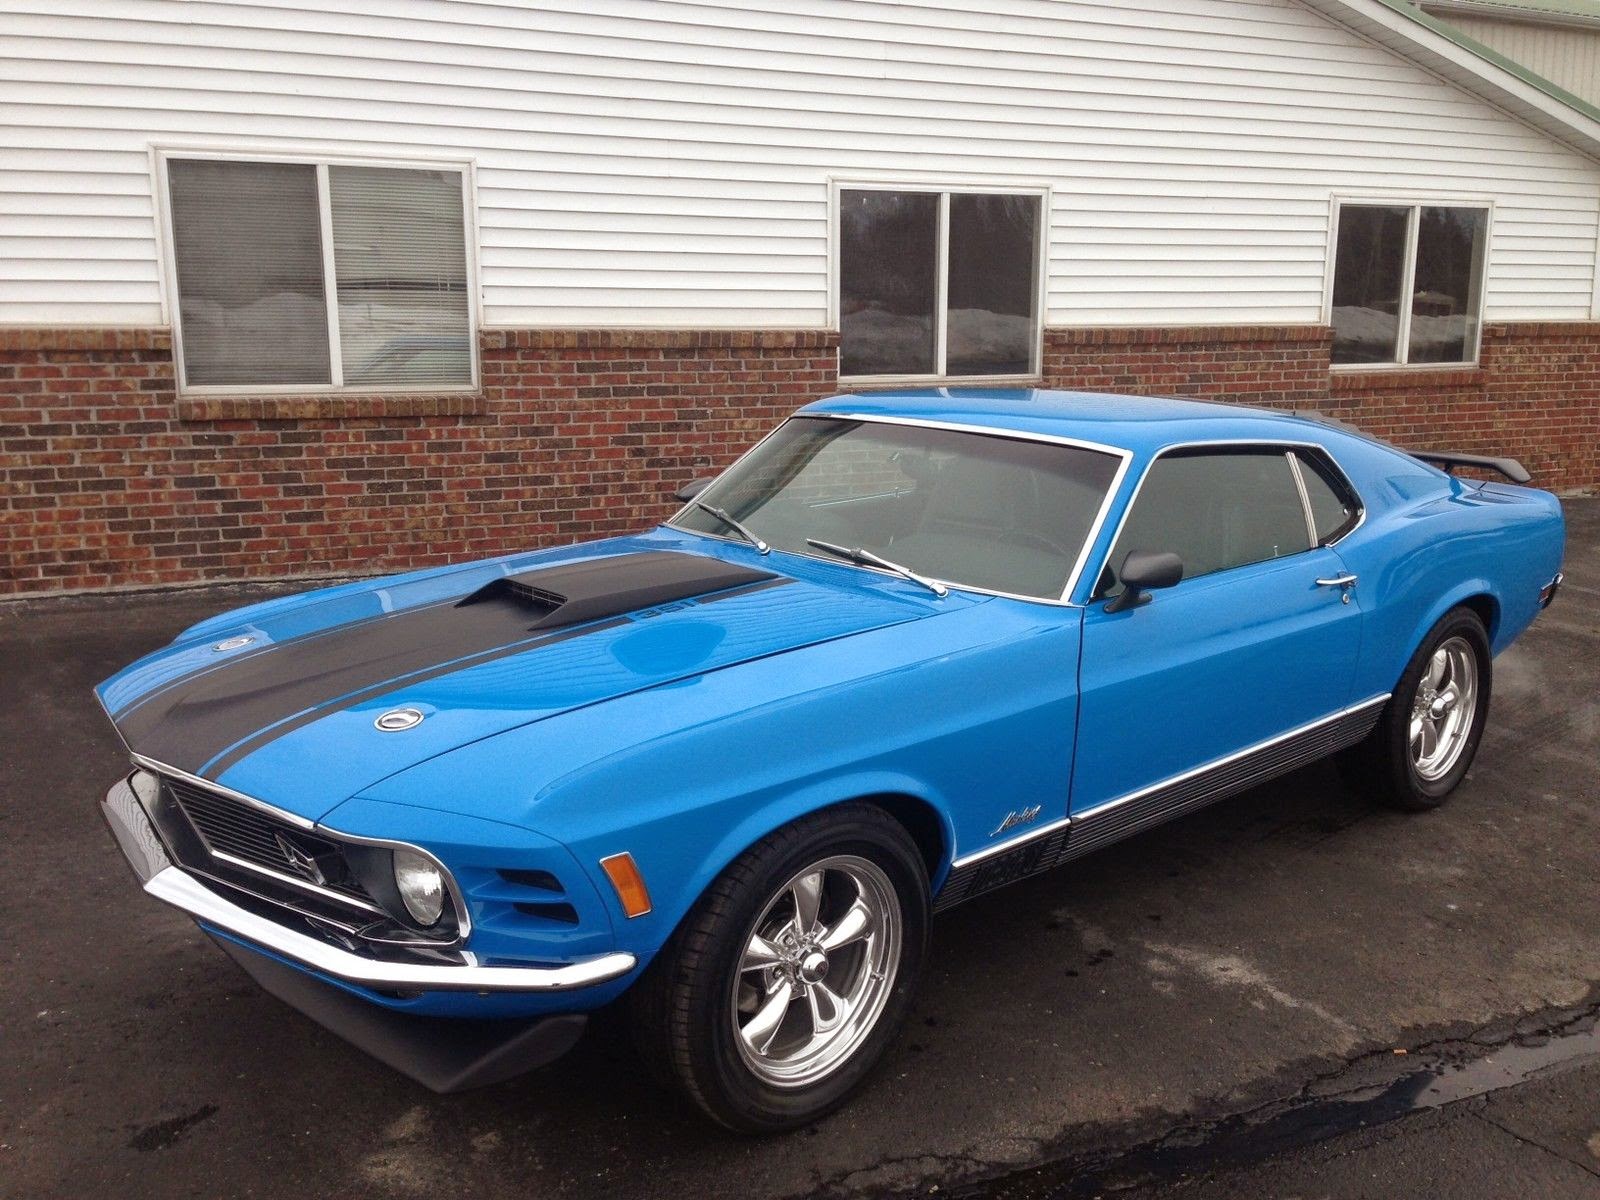 1970 Mustang Mach 1 Rotisserie Restoration ~ For Sale American Muscle Cars